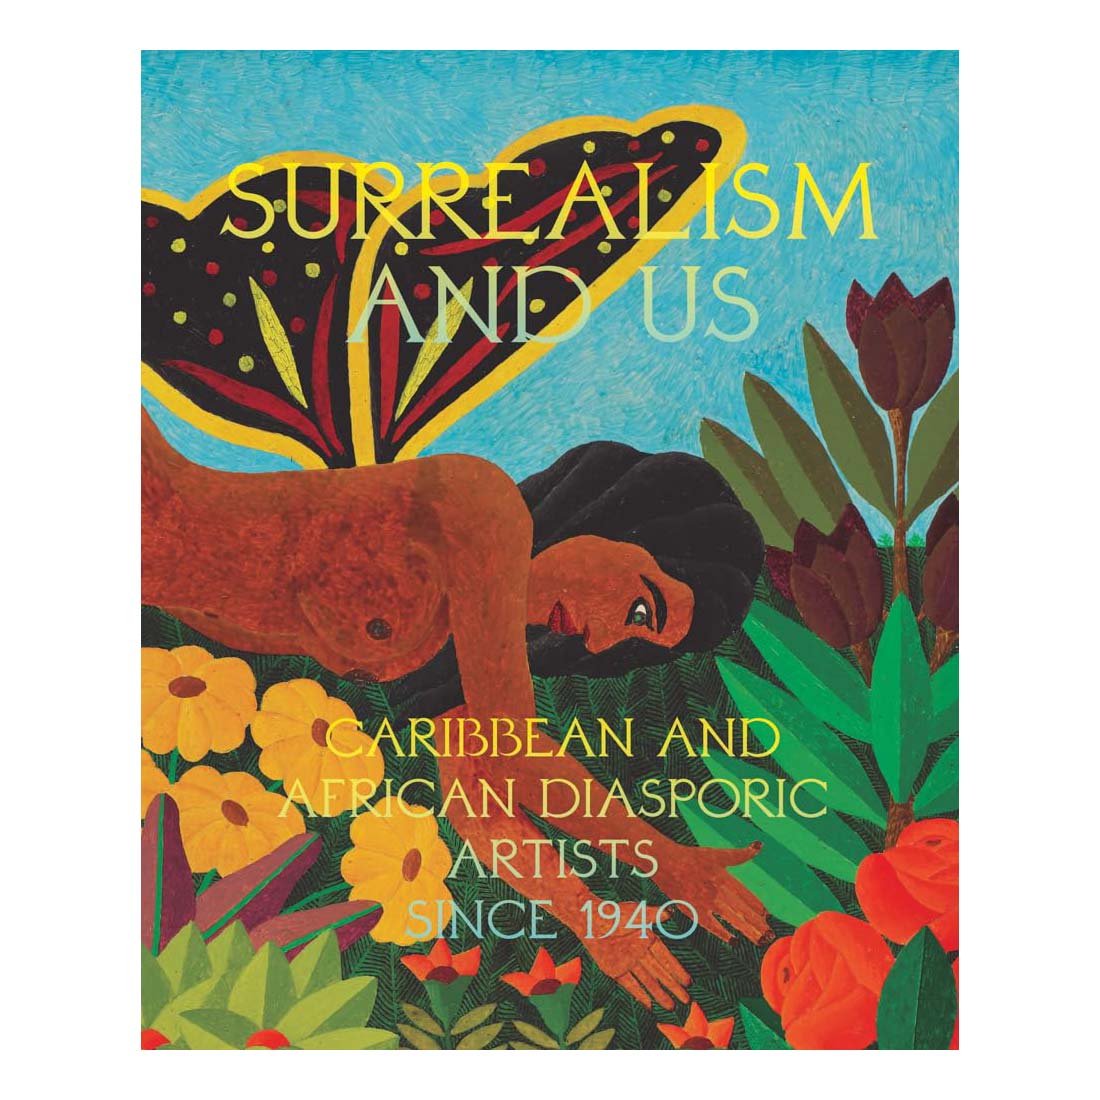 Surrealism and US: Caribbean and African Diasporic Artists Since 1940